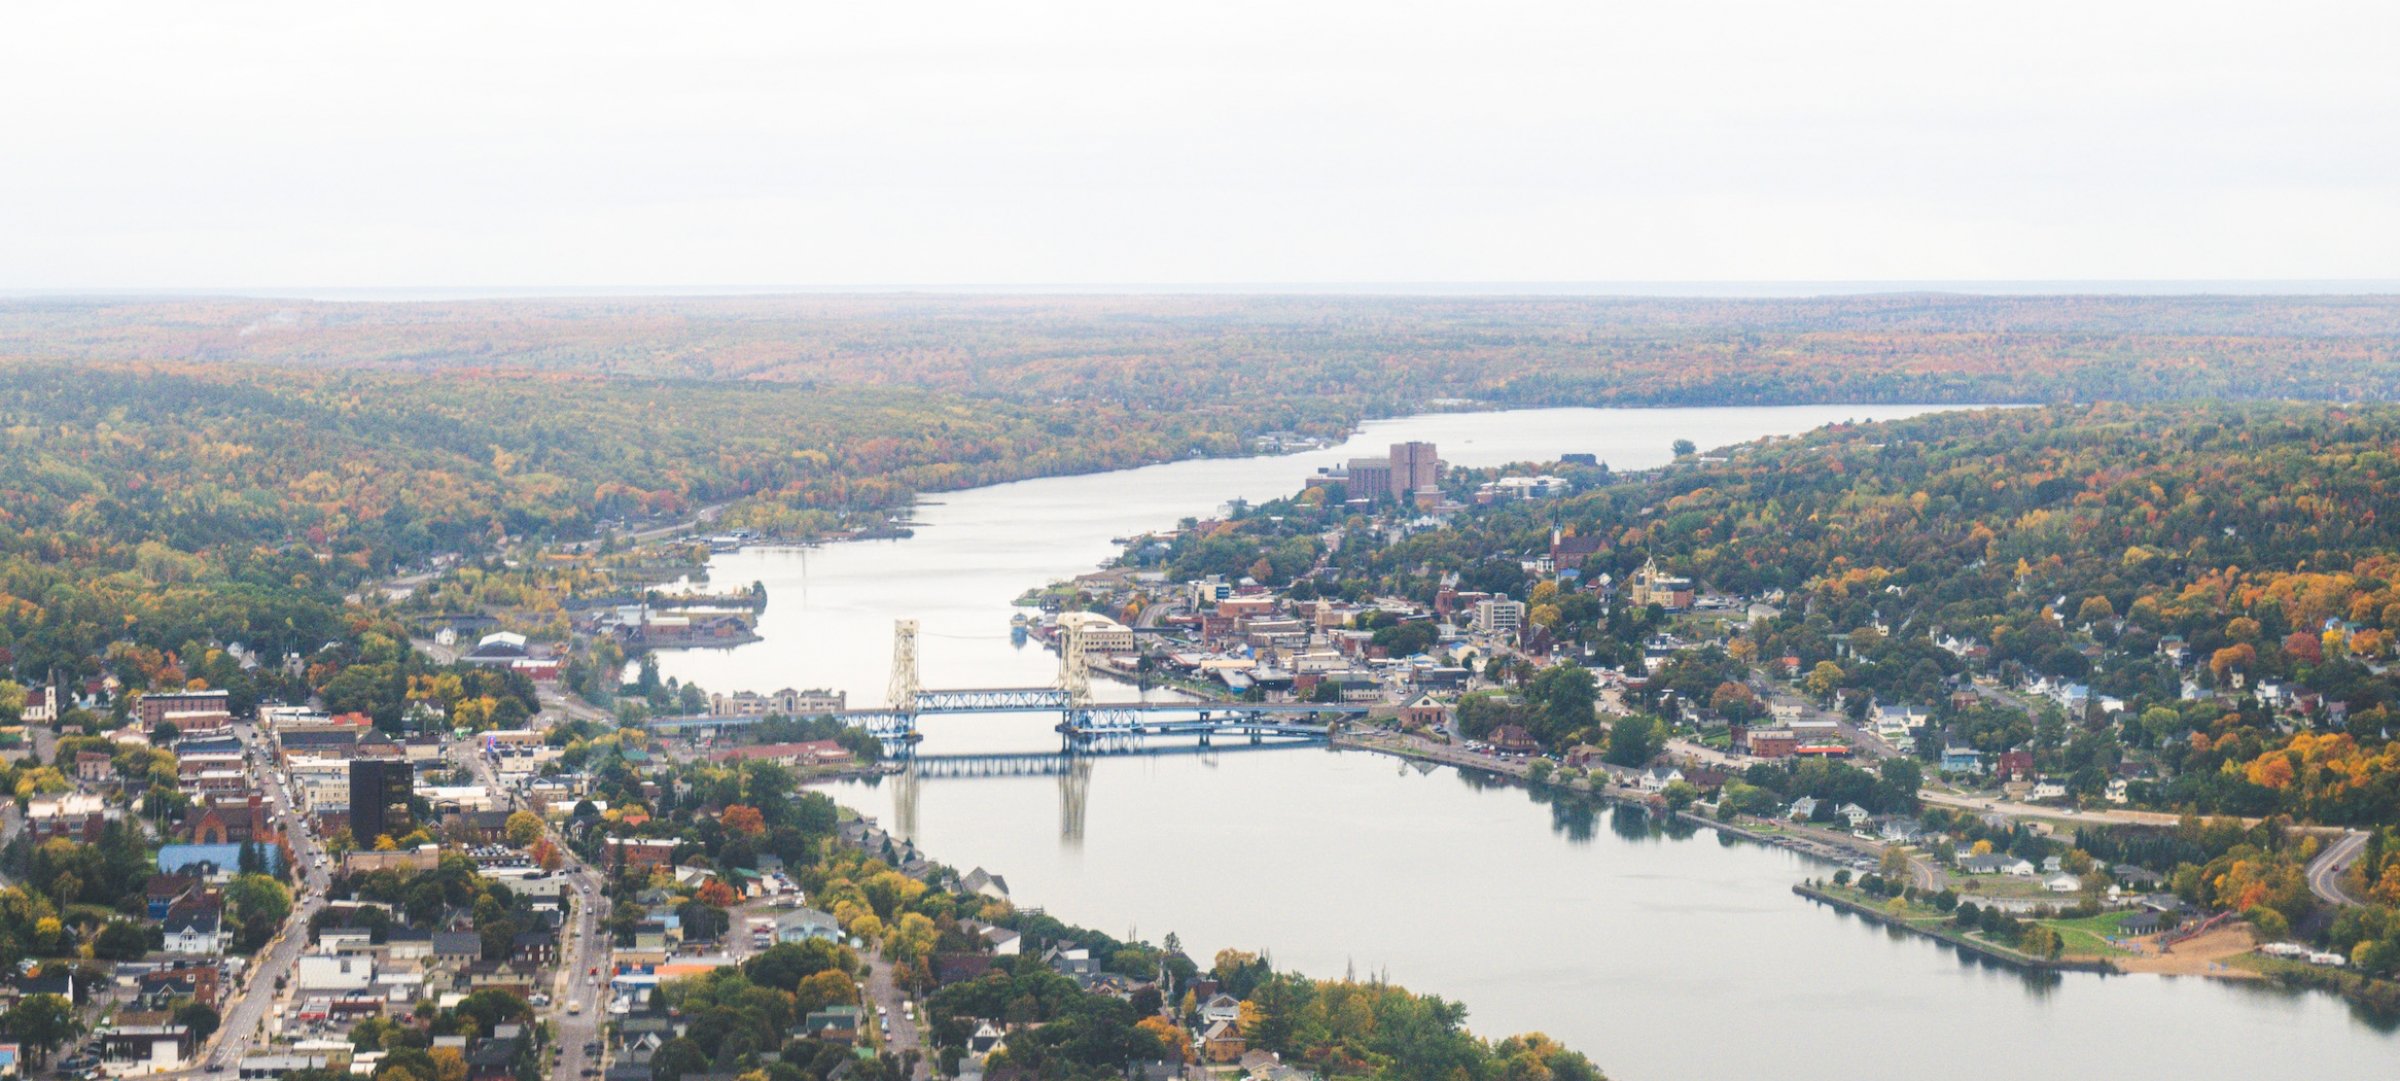 Aerial view of the Keweenaw waterway with Portage Lift Bridge and Michigan Tech in the distance.